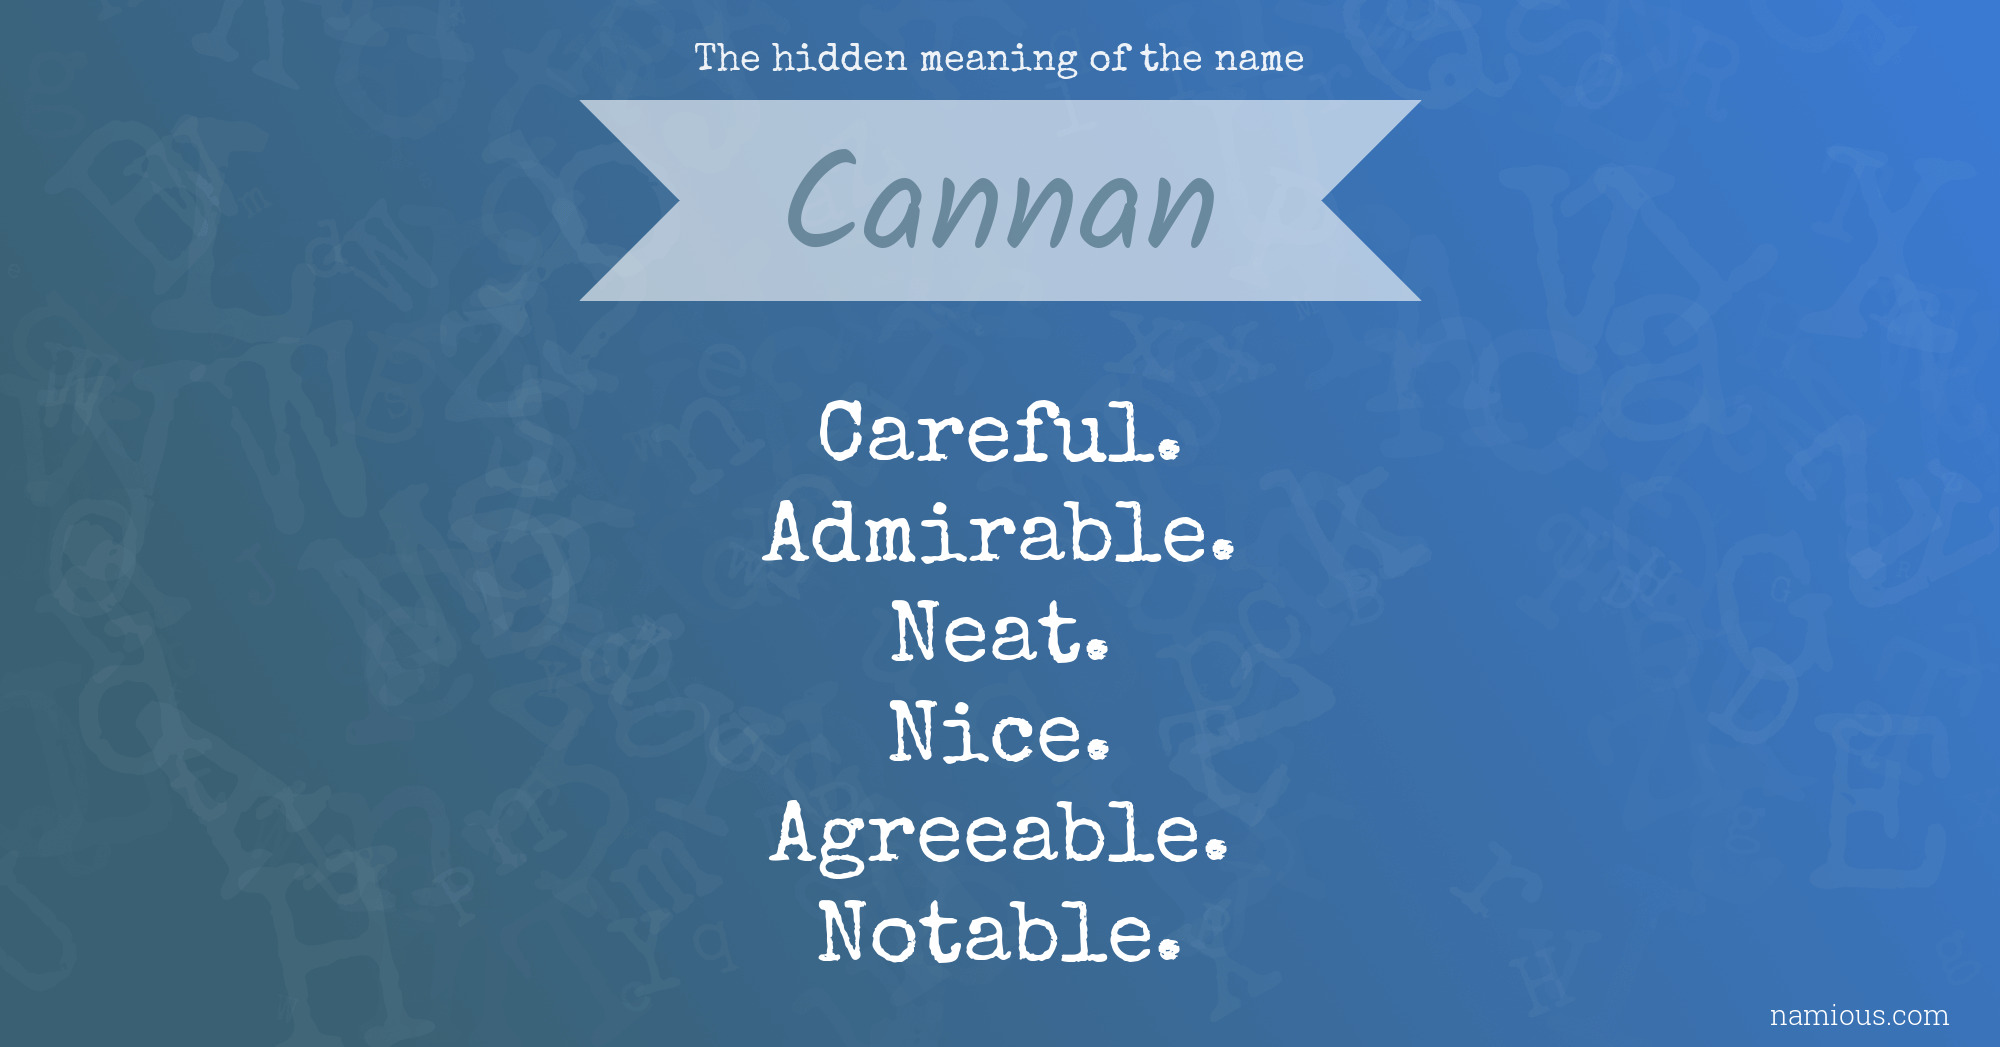 The hidden meaning of the name Cannan